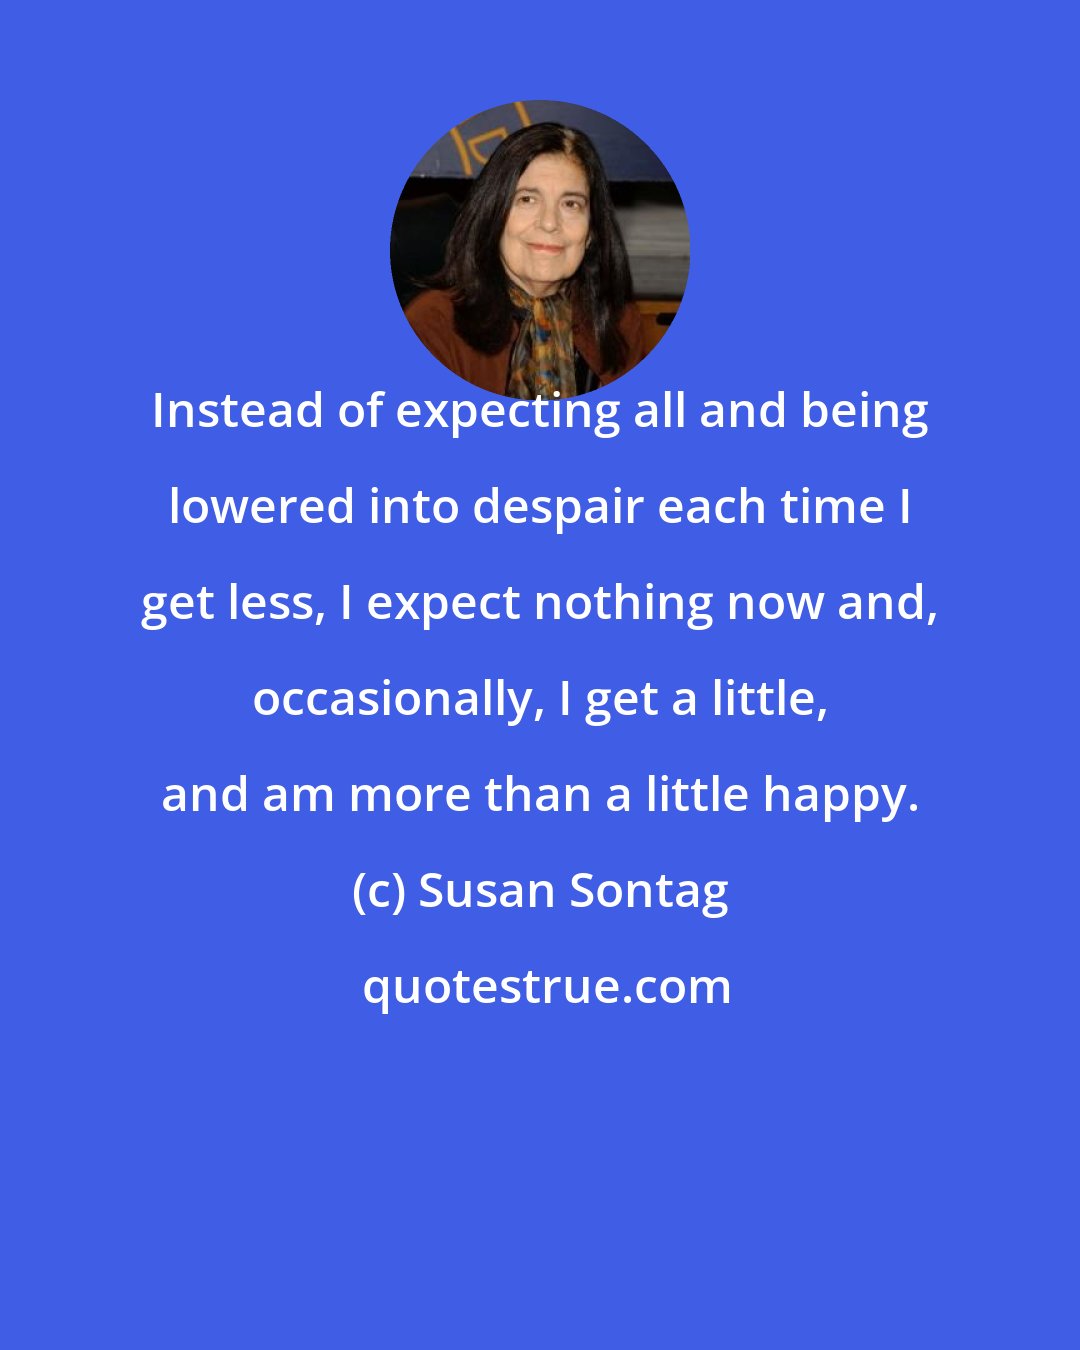 Susan Sontag: Instead of expecting all and being lowered into despair each time I get less, I expect nothing now and, occasionally, I get a little, and am more than a little happy.